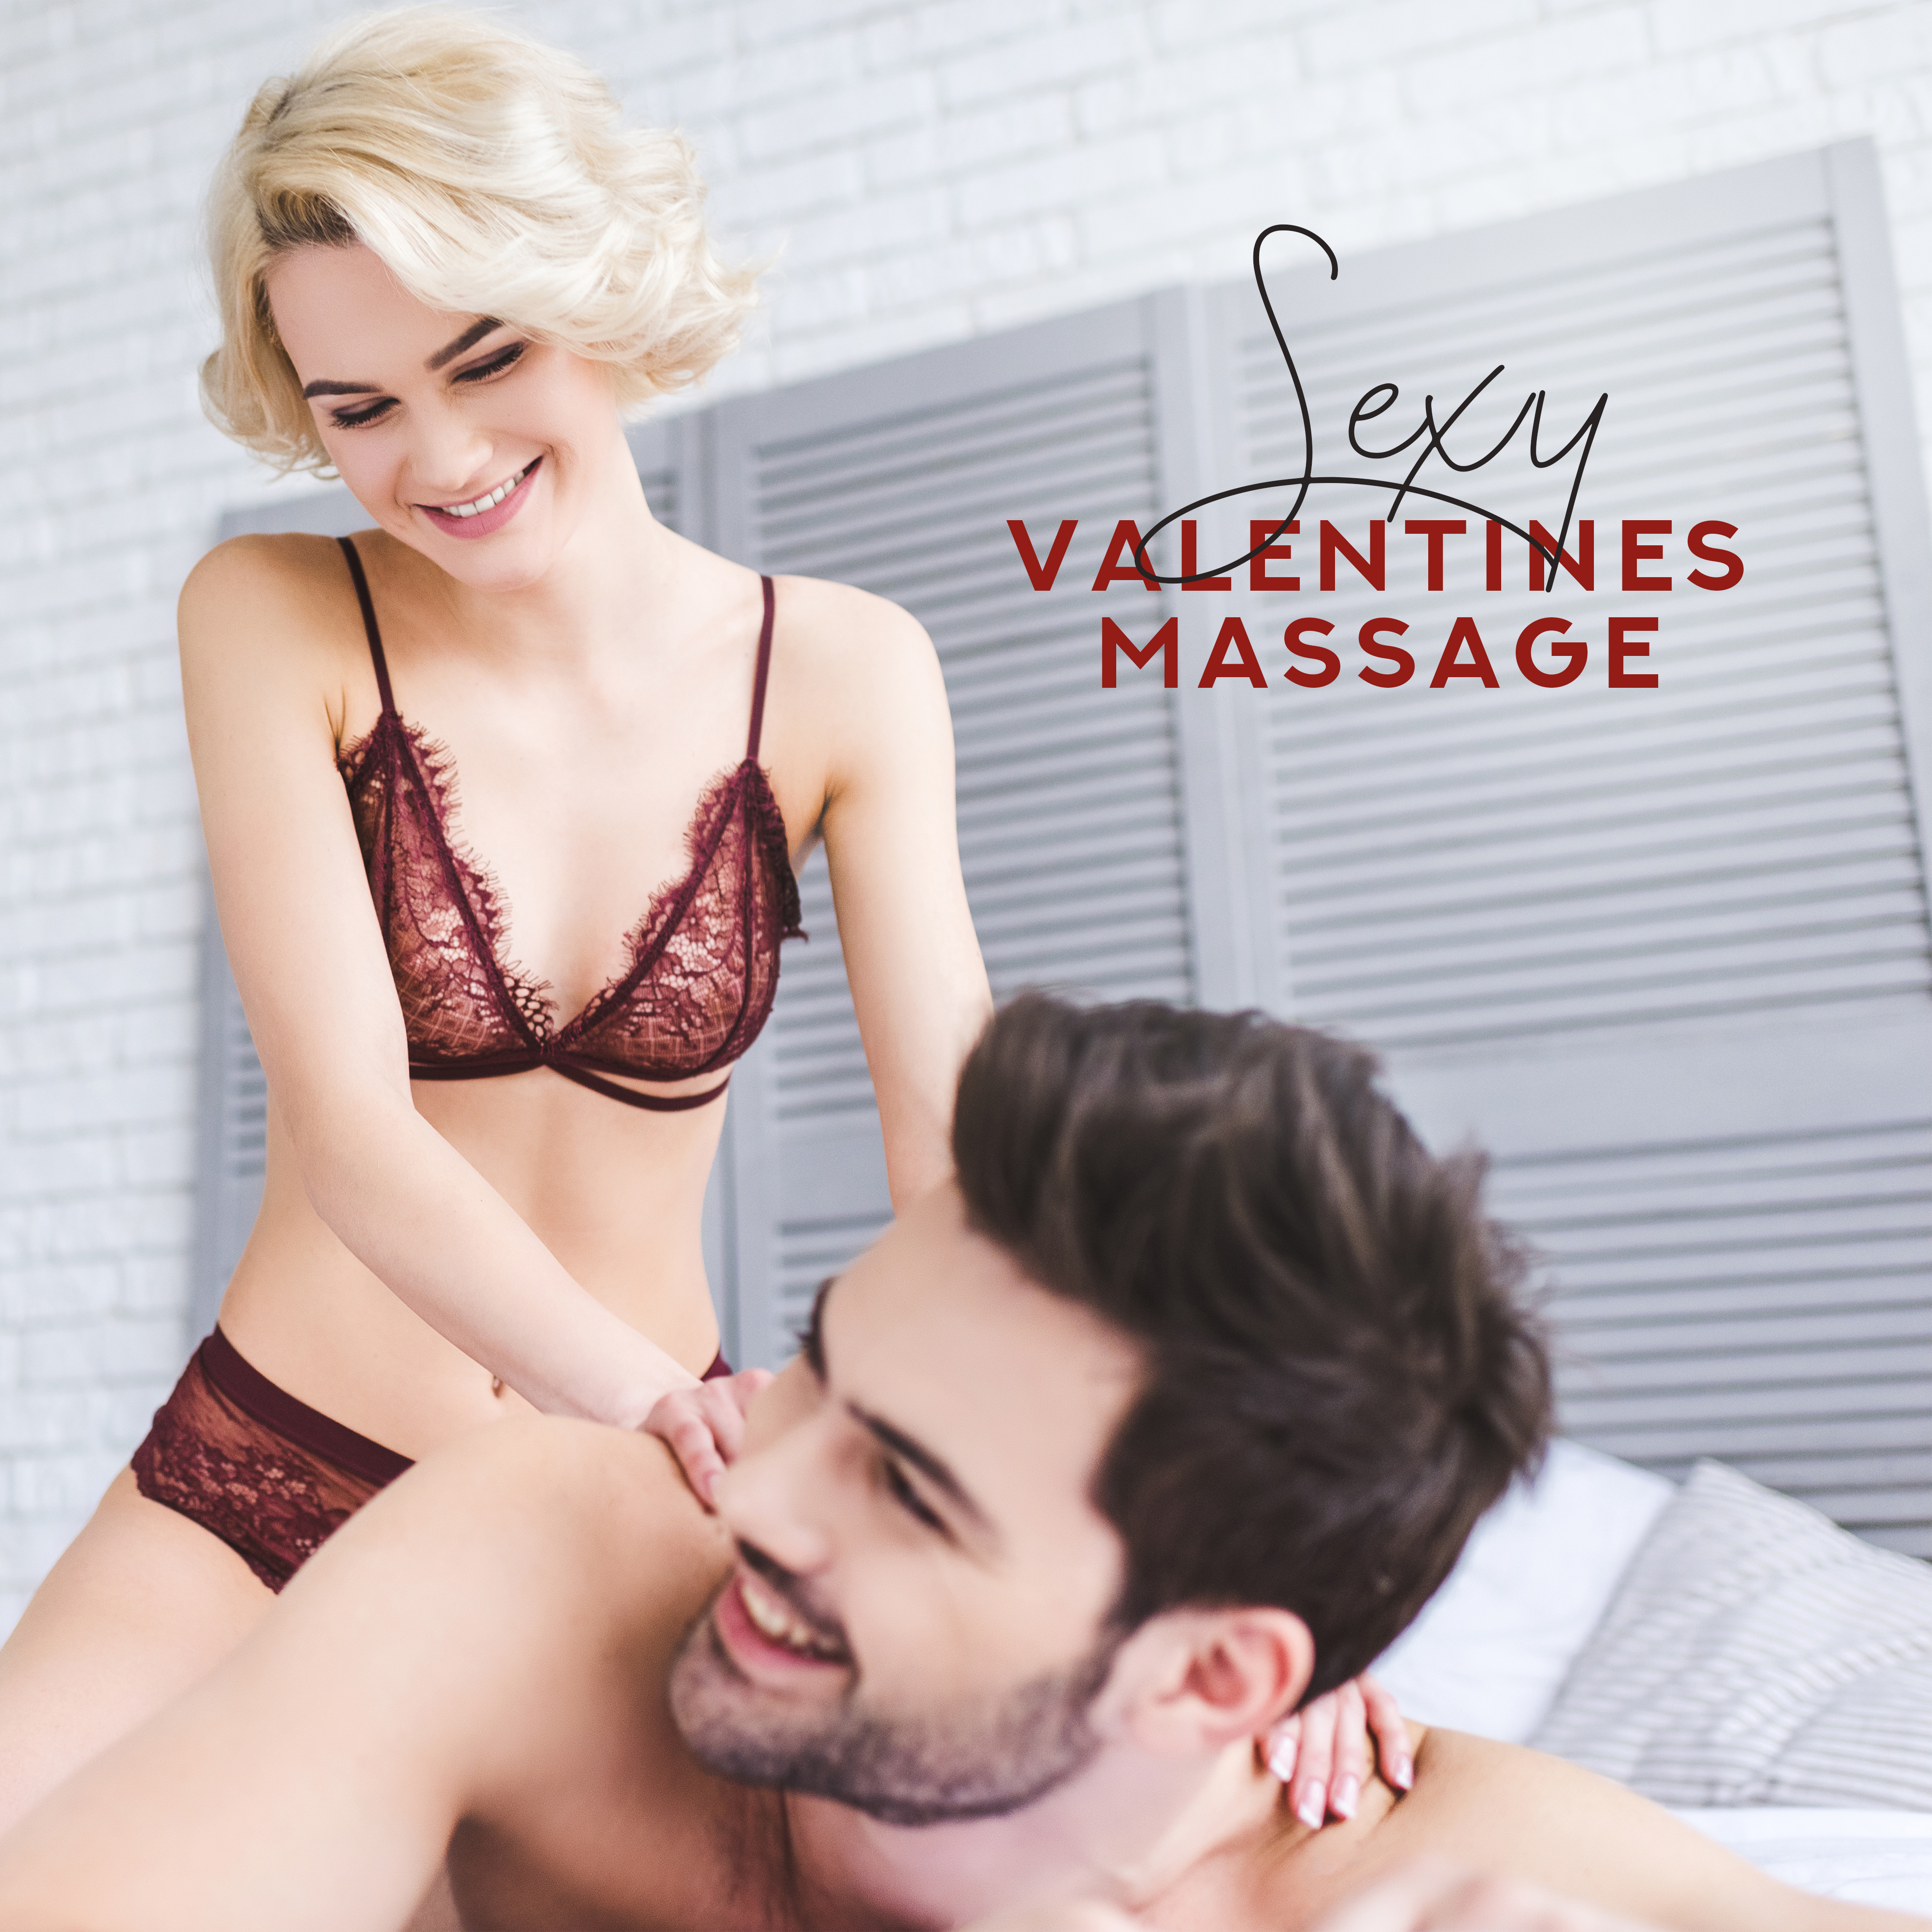 Valentines Massage  Erotic Meditation for Two, Sensual Yoga, Pure Relaxation, Sensual Massage Music, Tantric Music at Night